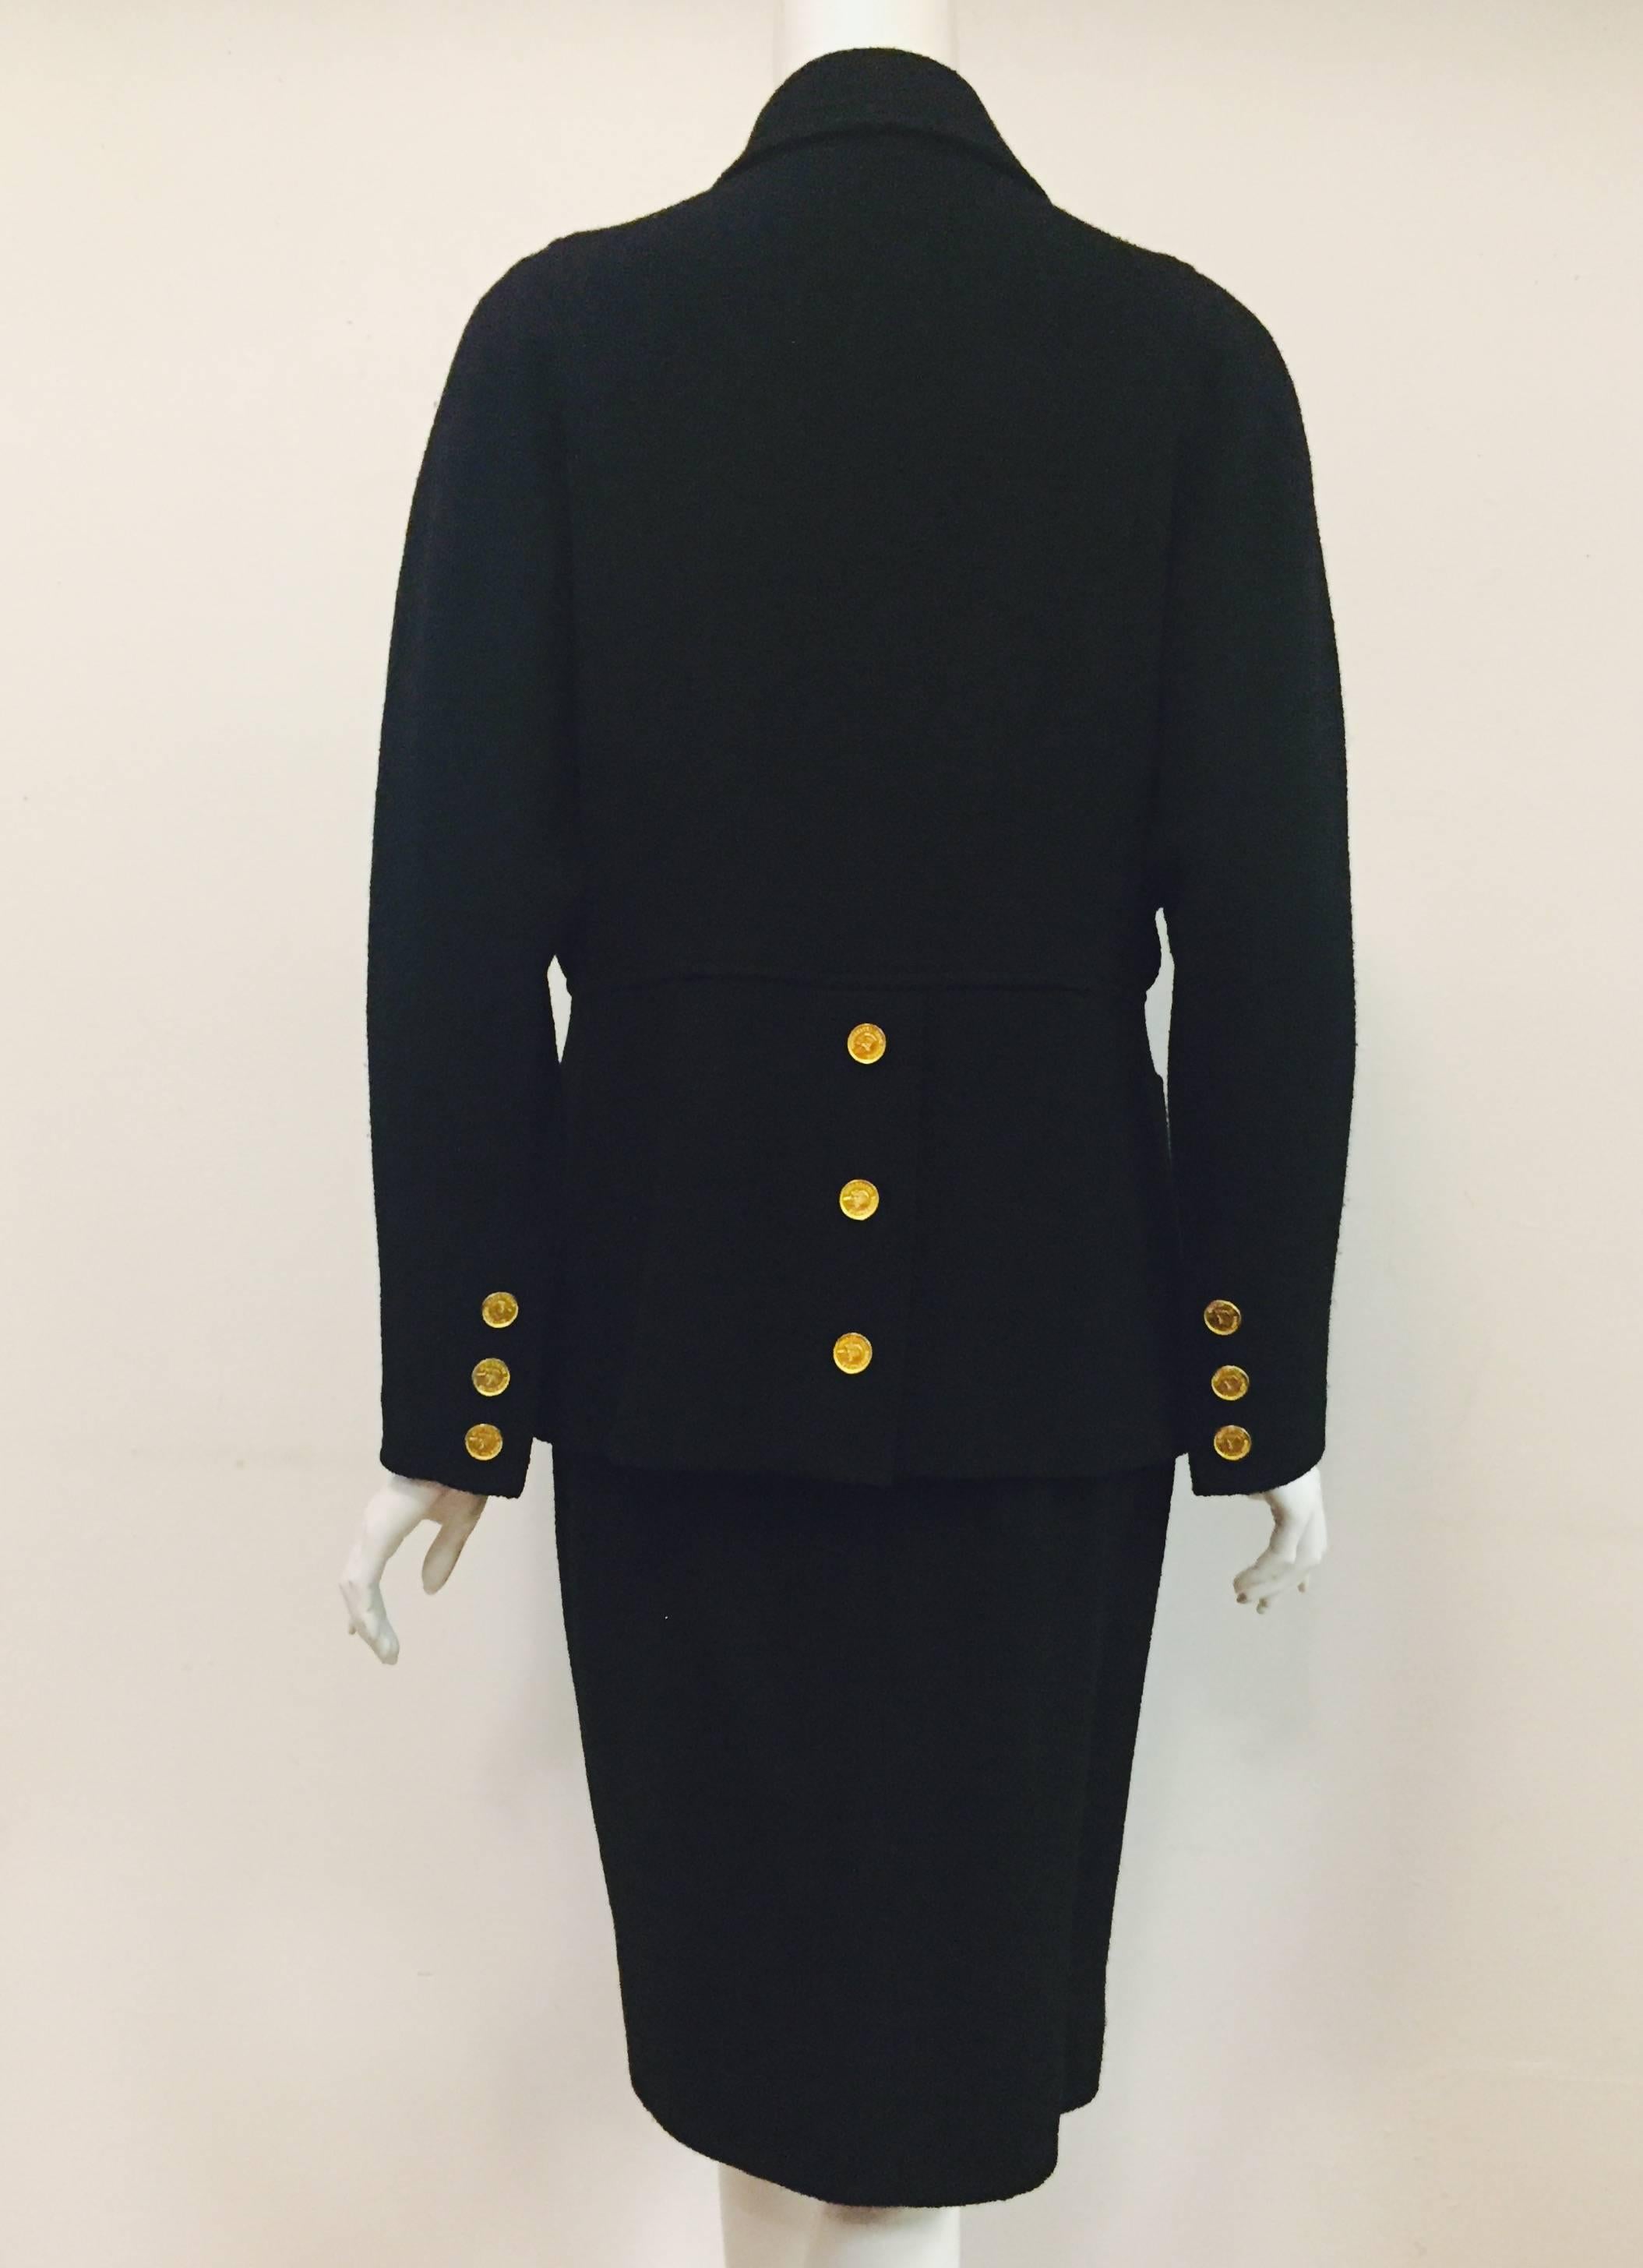 Classic Chanel Boutique Black Skirt Suit with Iconic Goldtone Profile Buttons In Excellent Condition For Sale In Palm Beach, FL